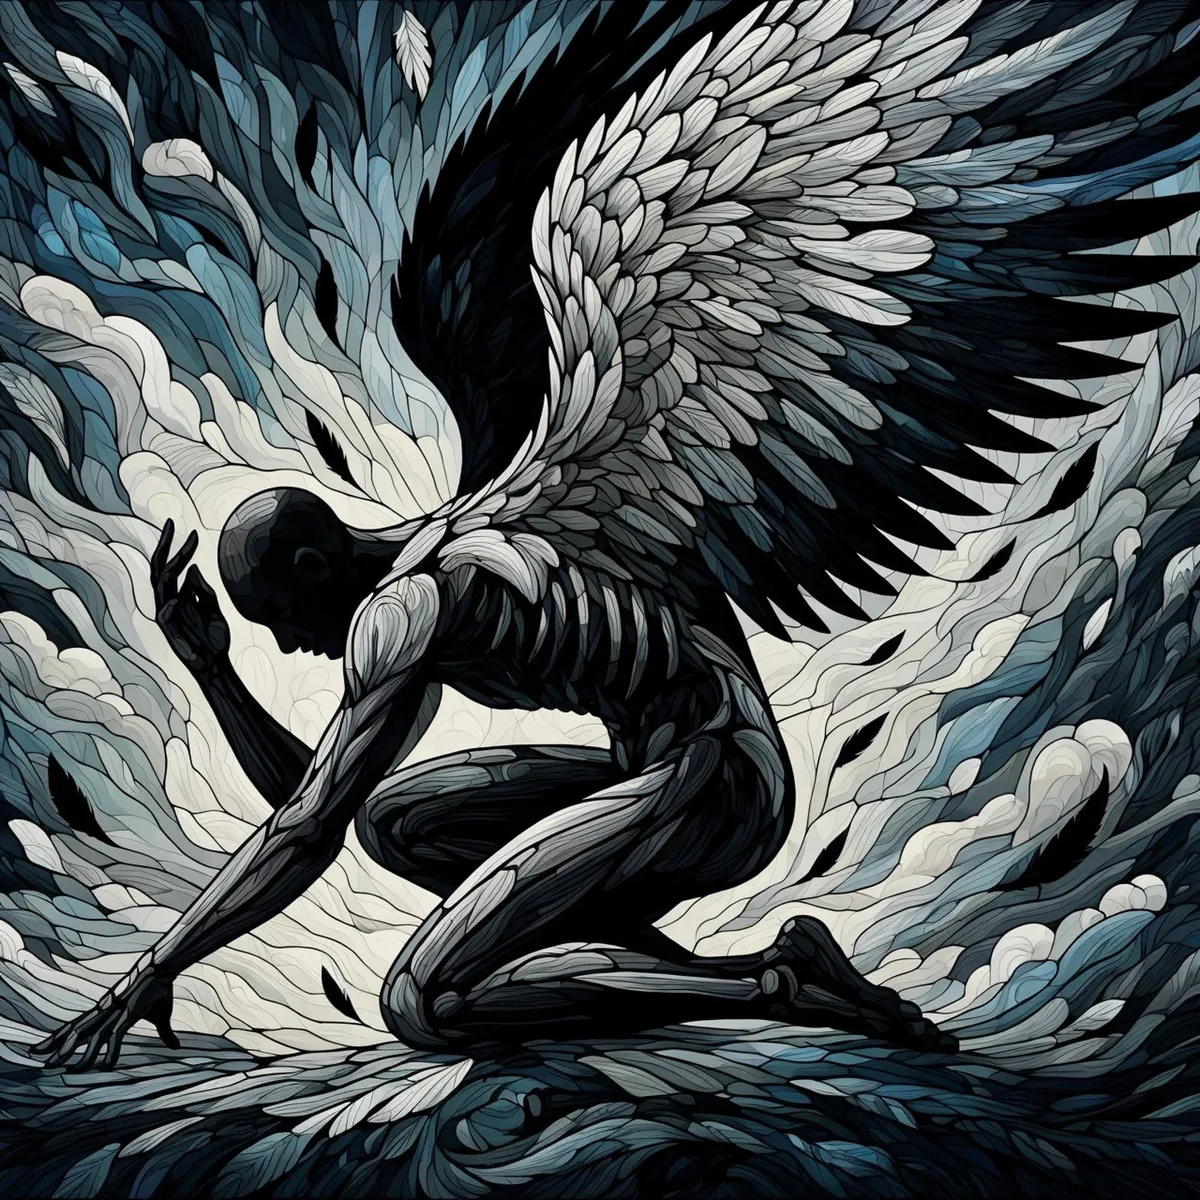 Stylized digital art of a fallen angel kneeling with large, textured wings, created using Stable Diffusion AI.